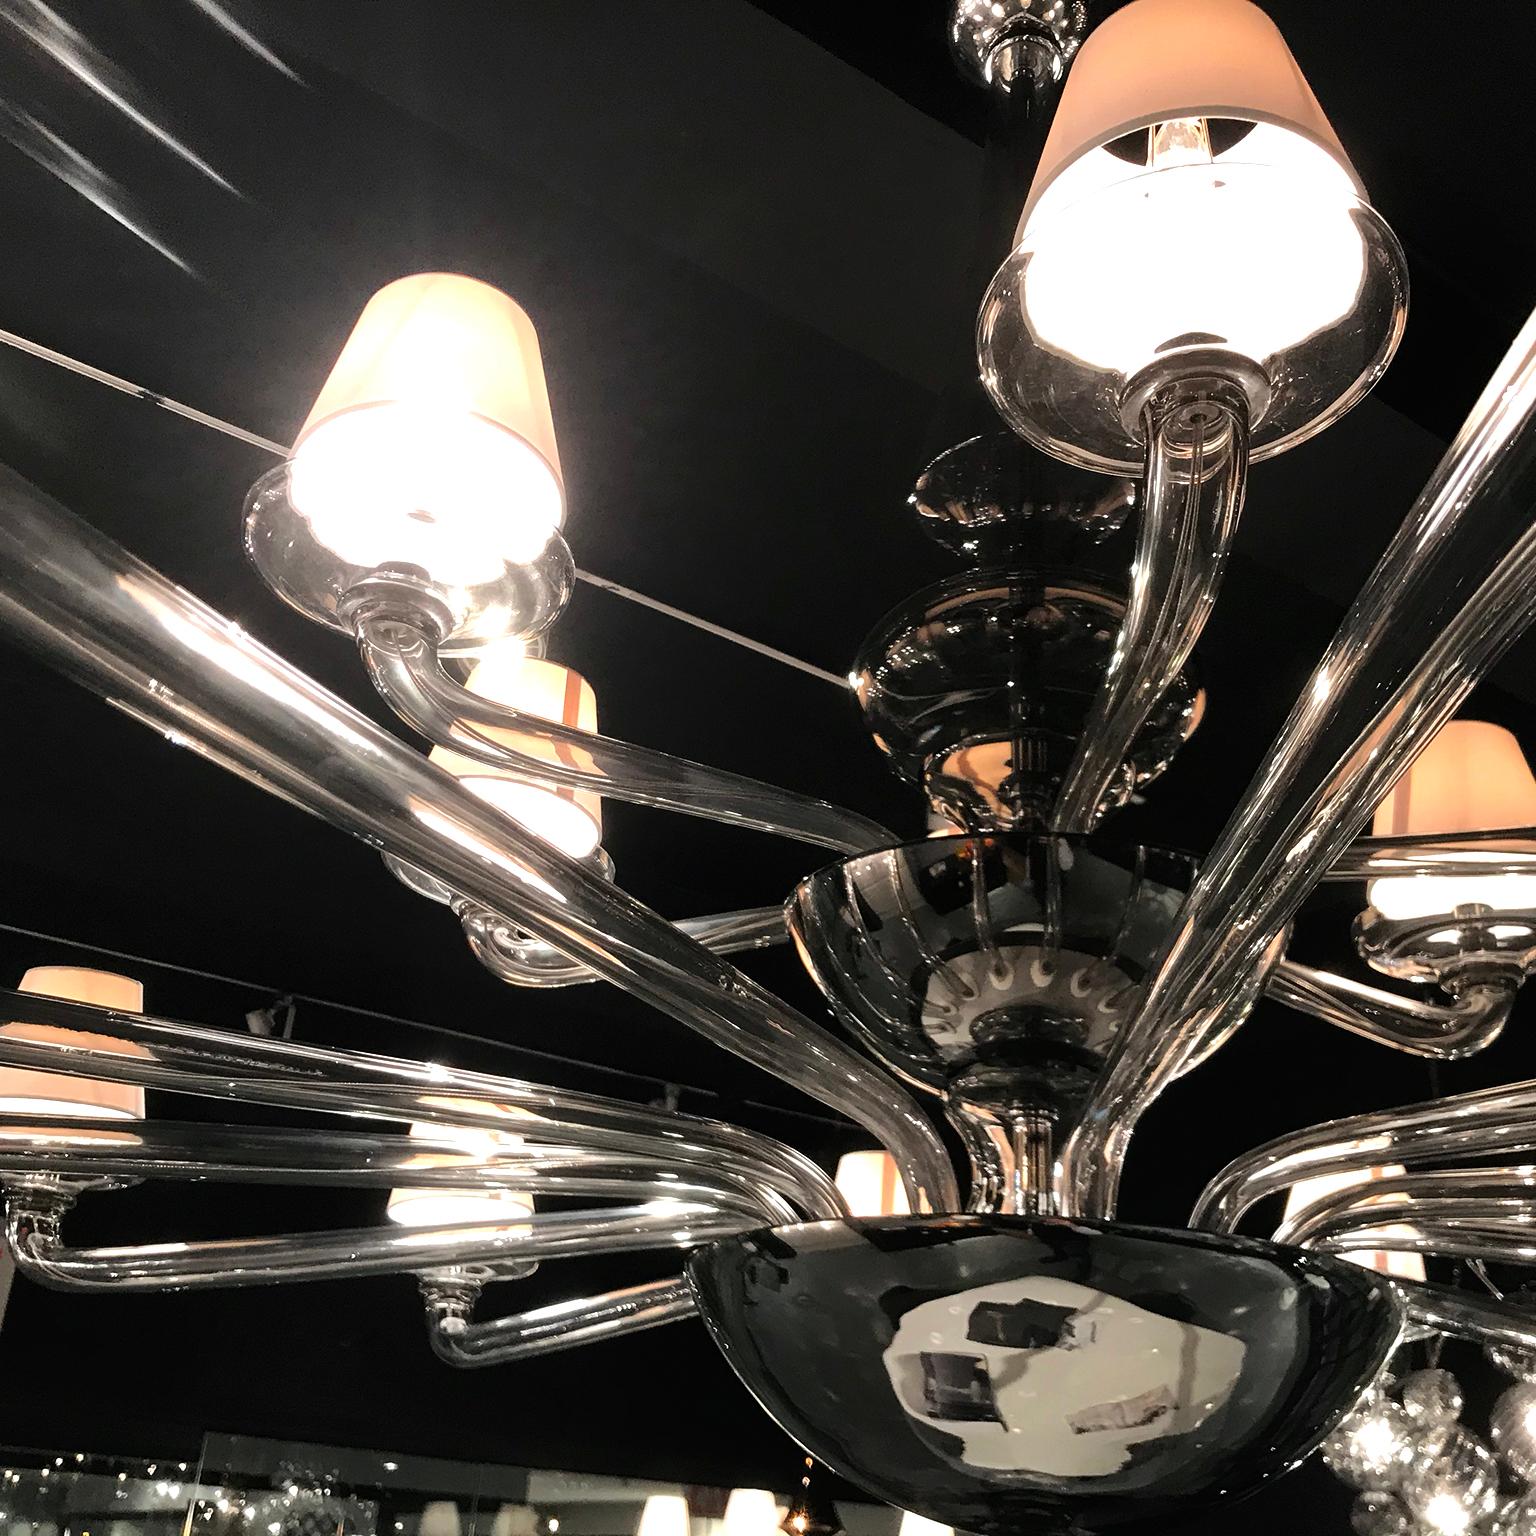 Coloniale Murano glass chandelier by Seguso Vetri d'Arte. Handmade, blown Murano glass in an elegant, refined shape inspired by midcentury designs, capturing the essence of Seguso. The chandelier is made in grey transparent glass, creating a